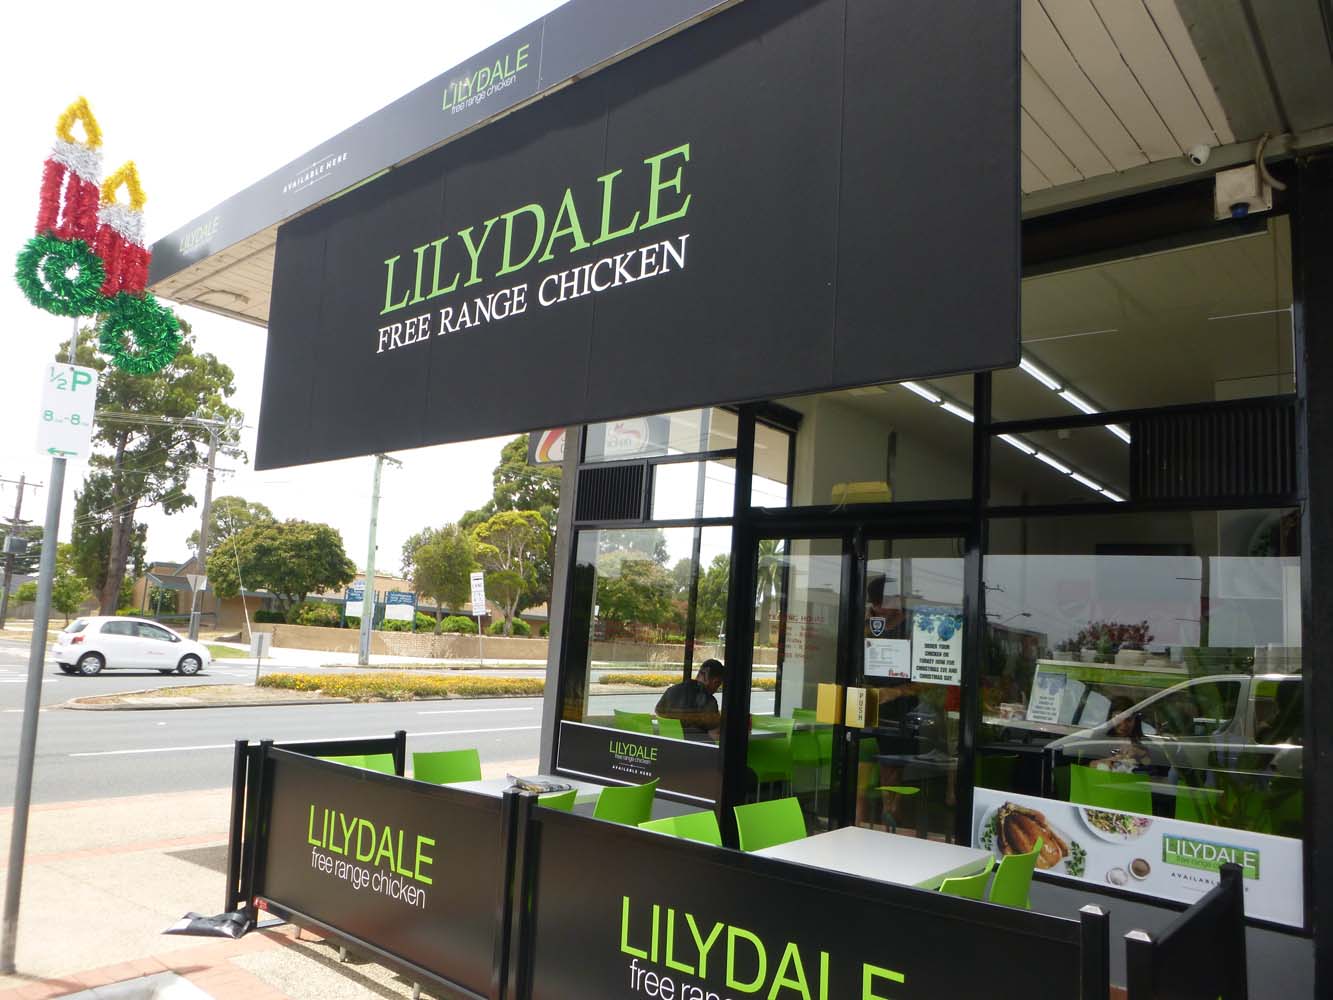 Commercial Awnings Melbourne Lifestyle Awnings